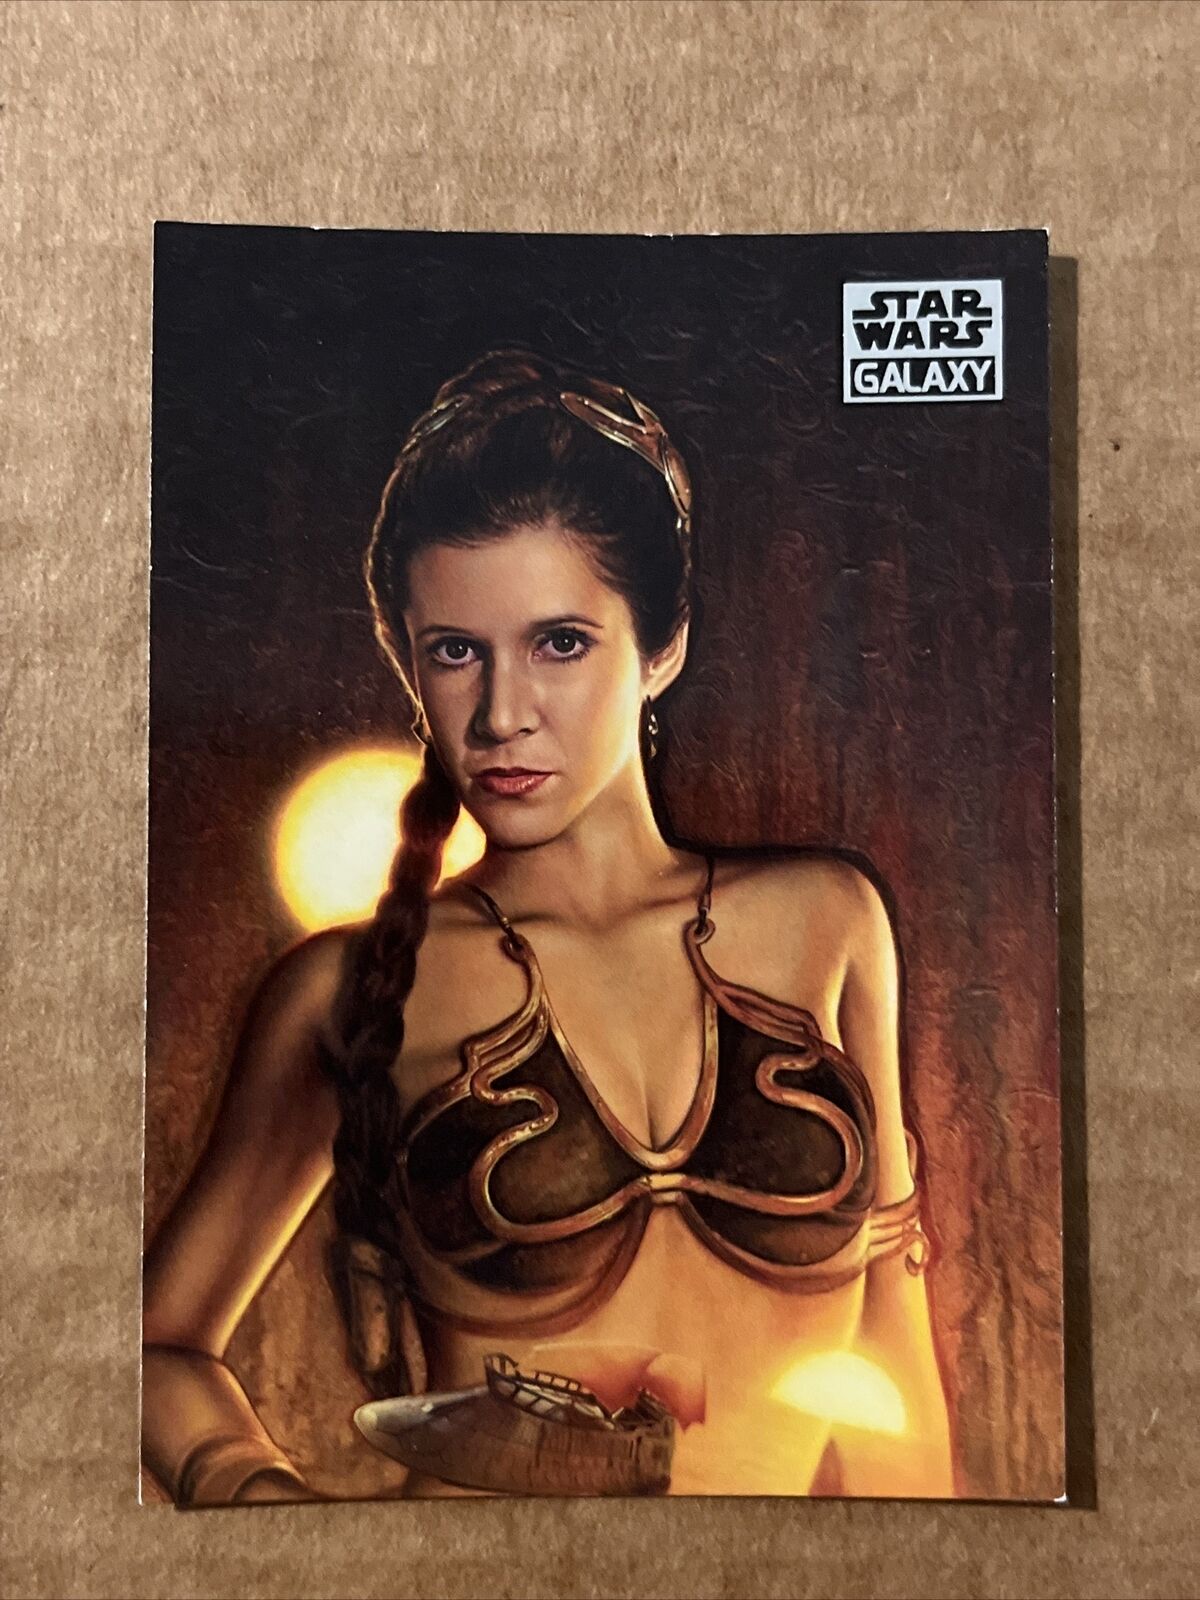 Different Side Of Princess Leia 2012 Topps Star Wars Galaxy Series 7 Card #4 729